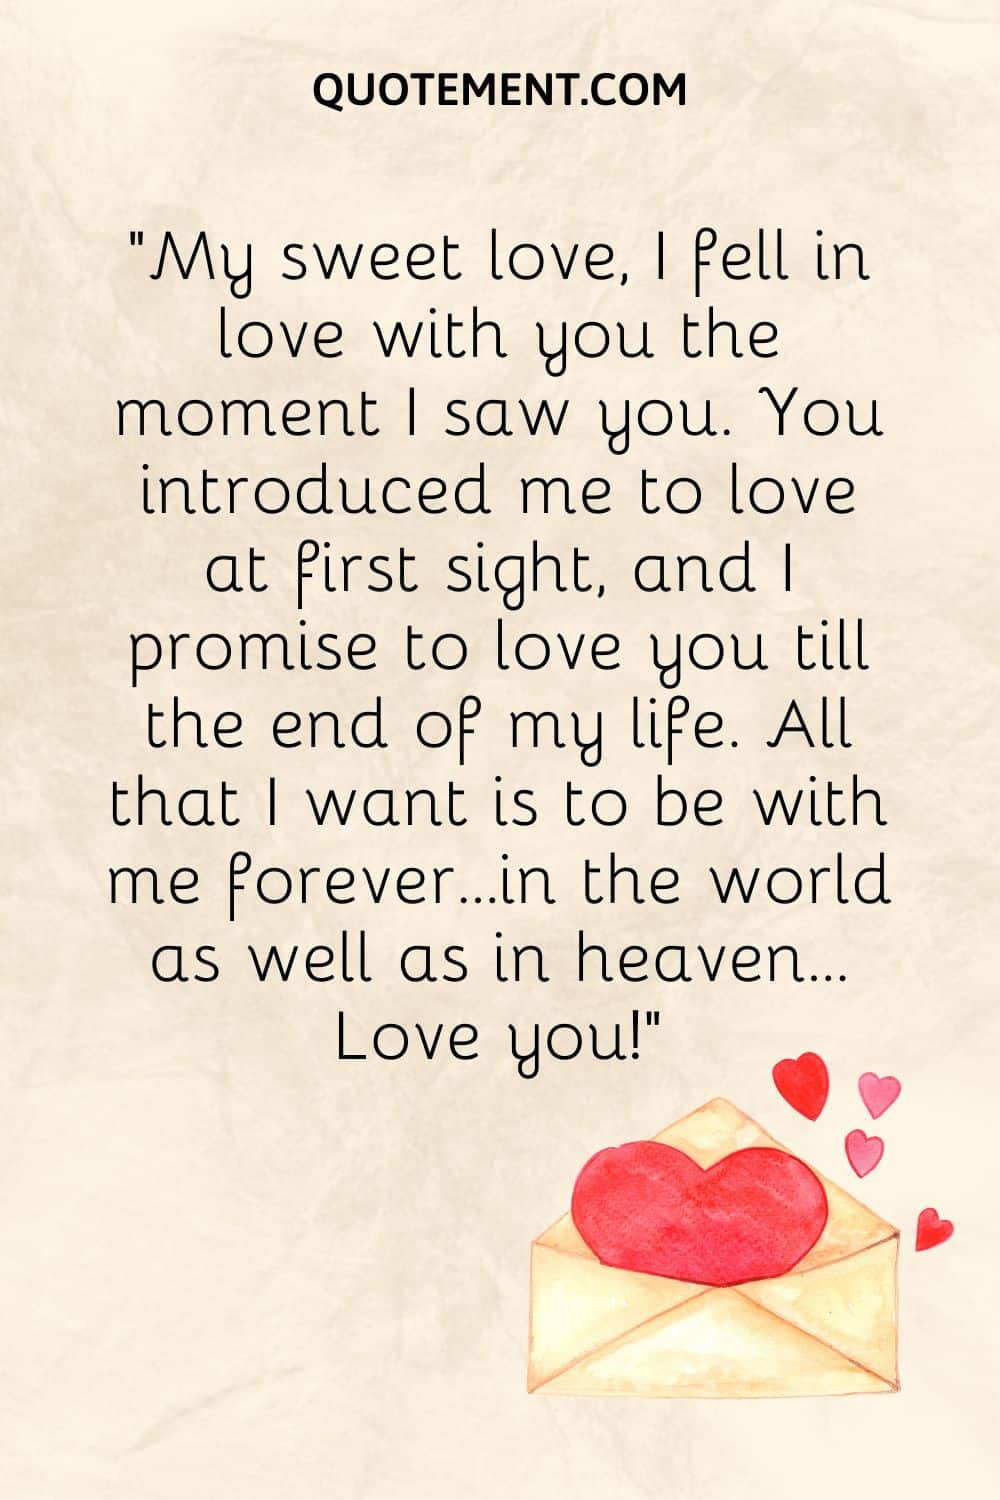 I fell in love with you the moment I saw you